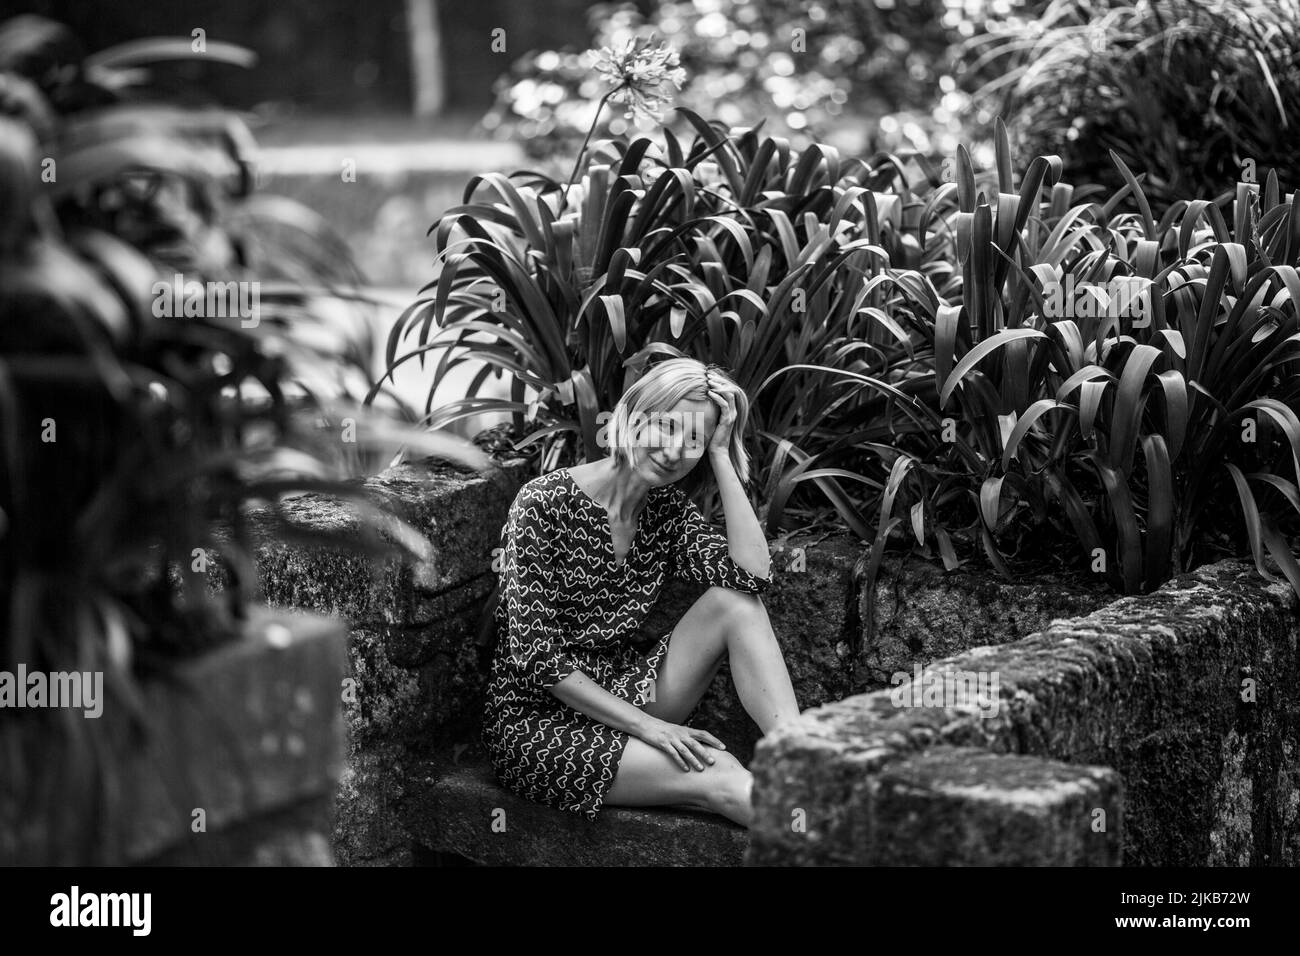 A woman sits on a stone bench in old parkl. Black and white photo. Stock Photo